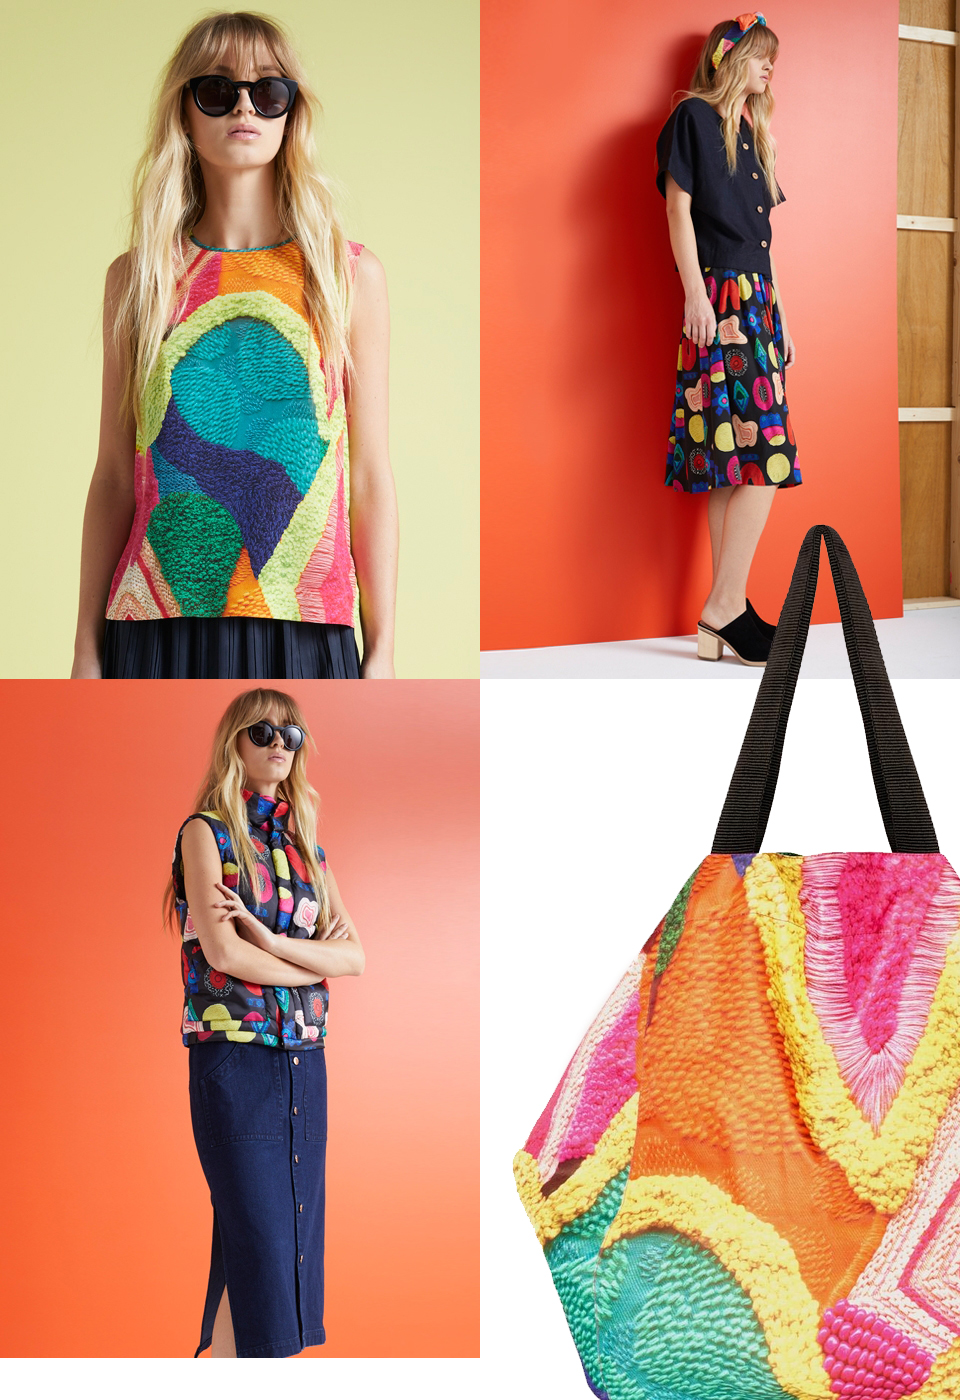 liz Payne x Gorman. Limited edition collection. Get in quick!